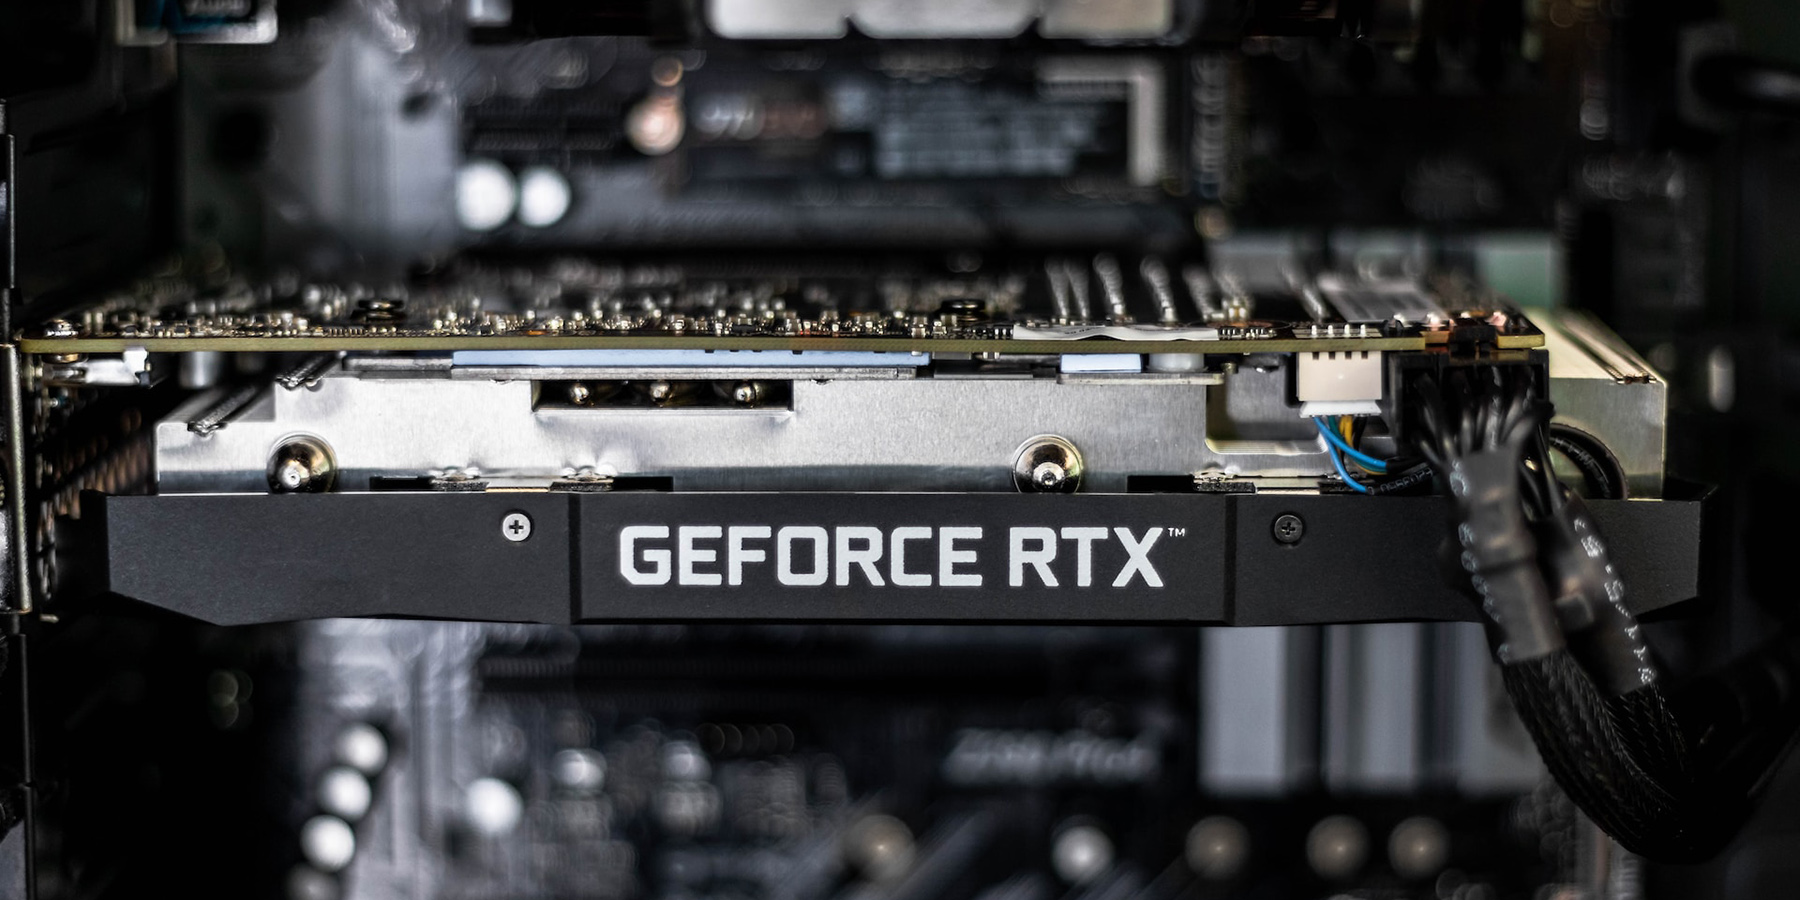 Nvidia GeForce RTX 3060 Reviews, Pros and Cons